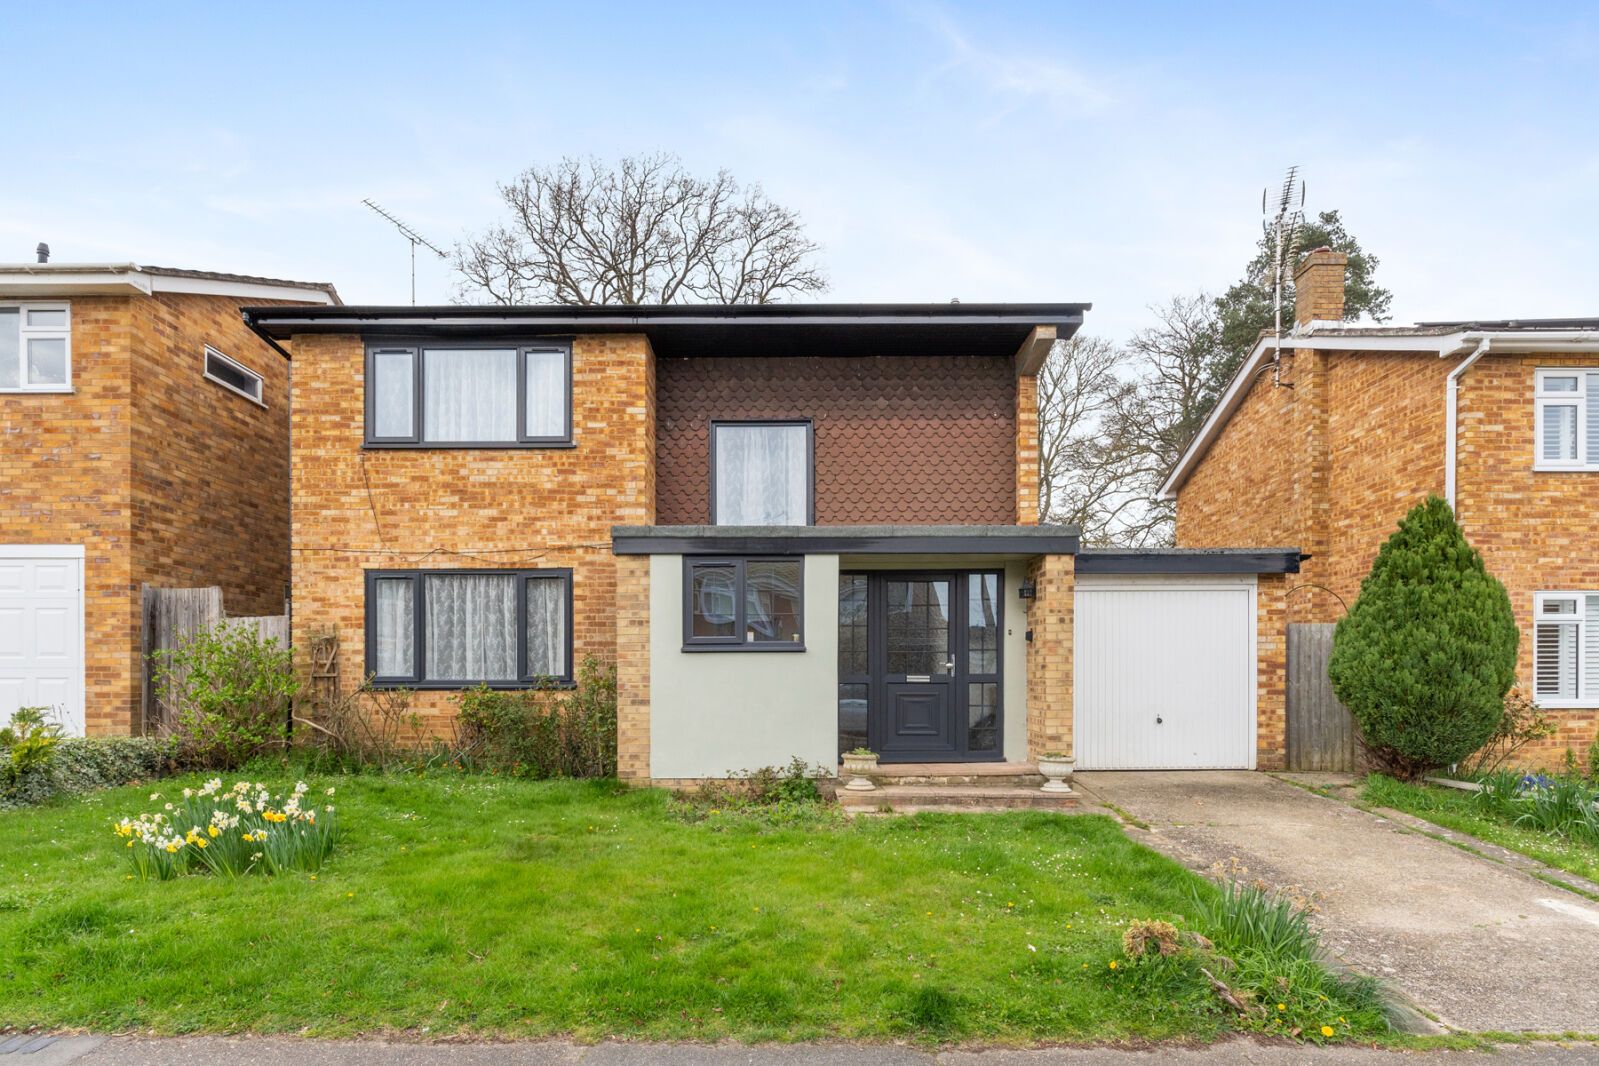 3 bedroom detached house for sale Rainsford Road, Stansted, CM24, main image